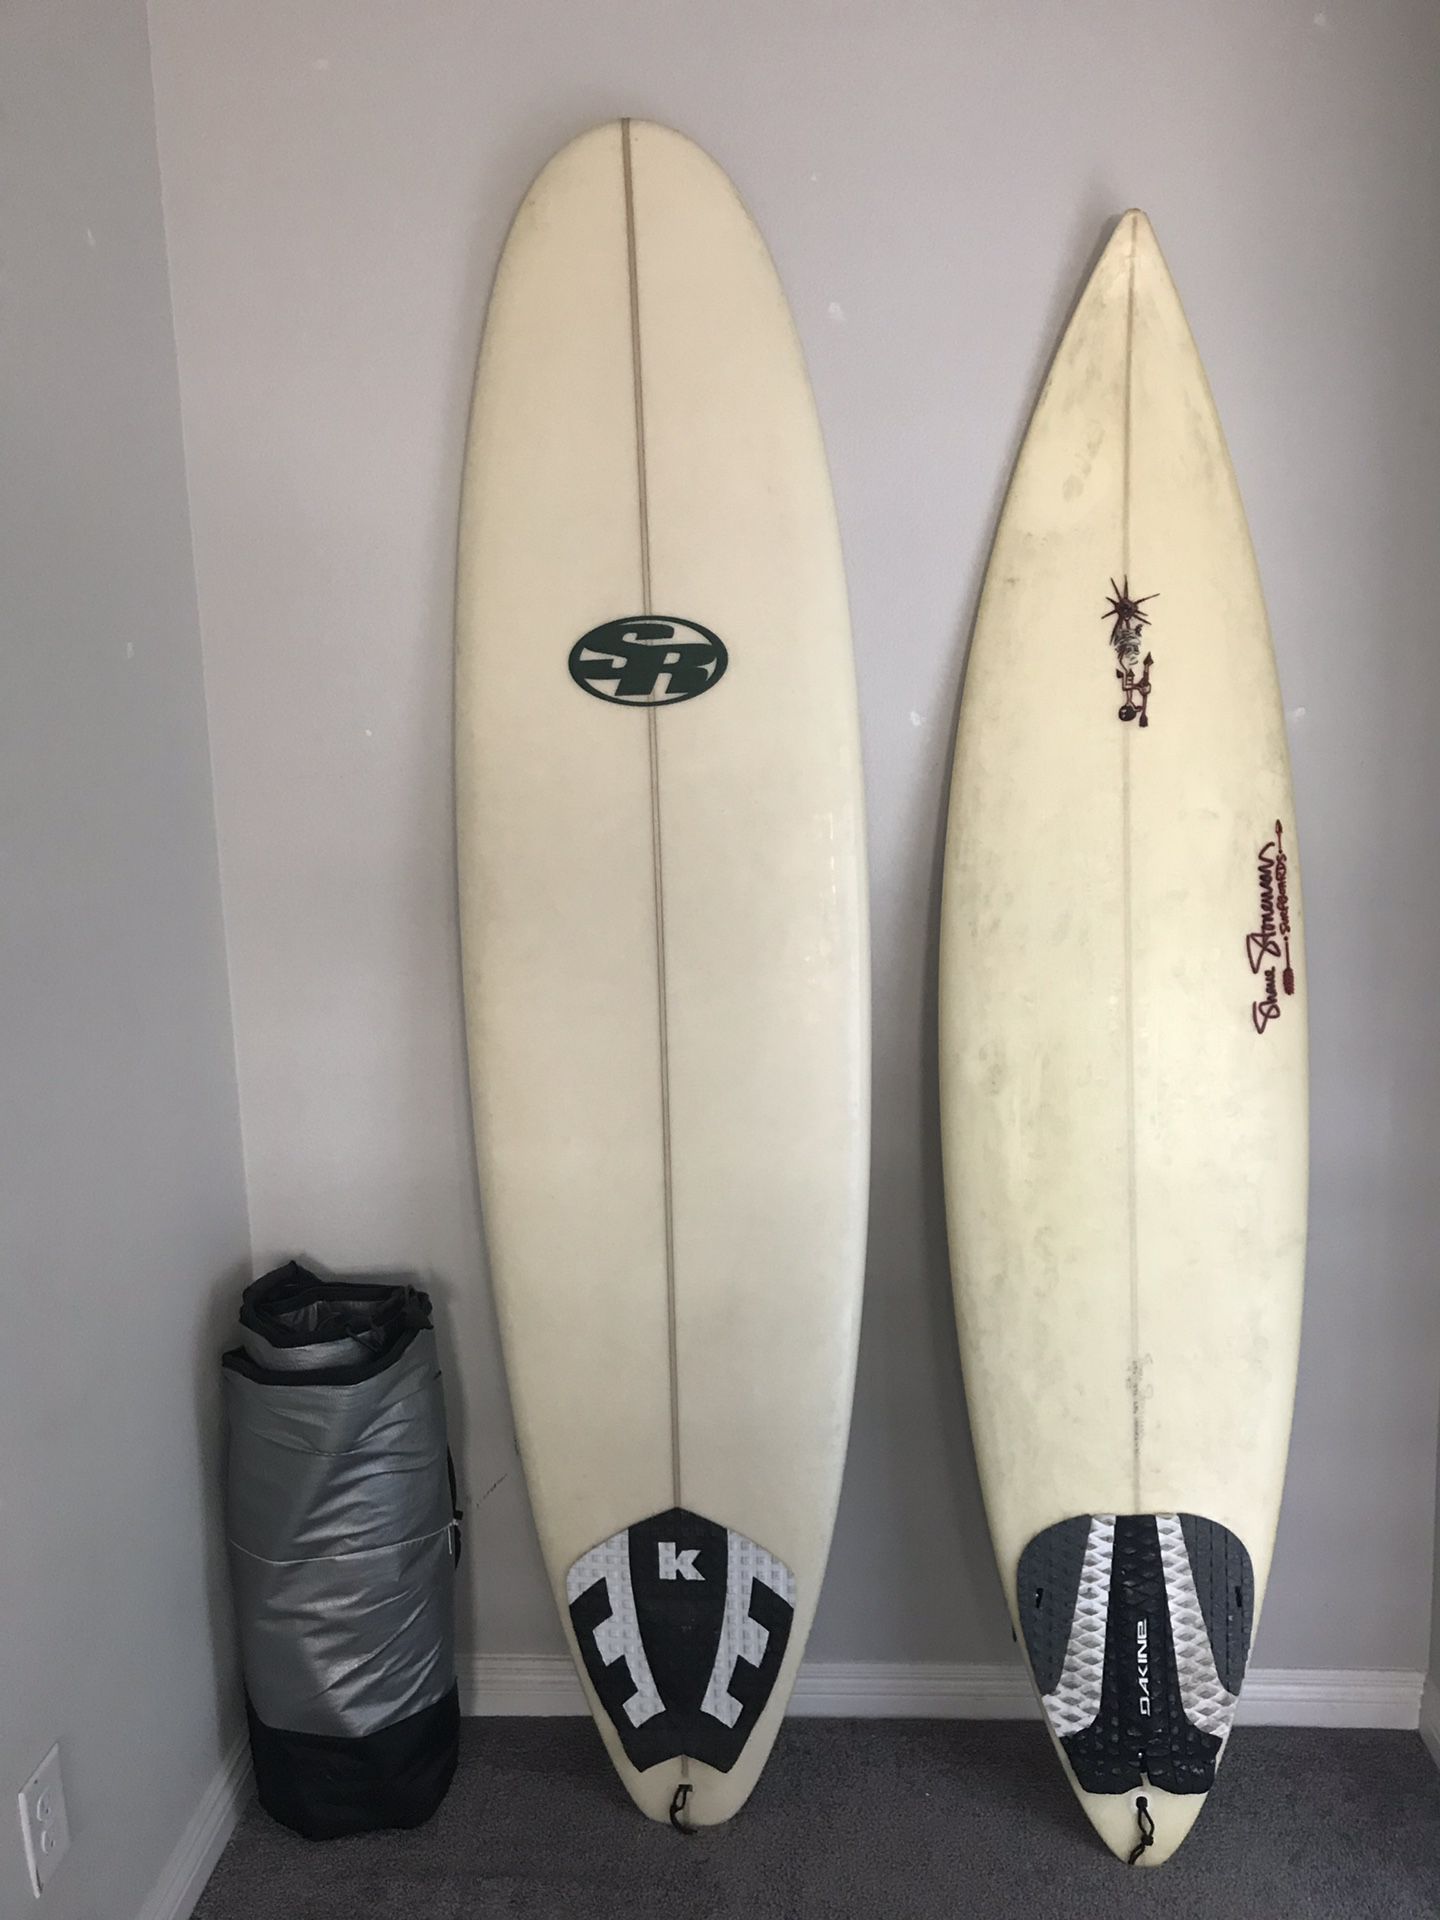 Surfboard s $300 for Both